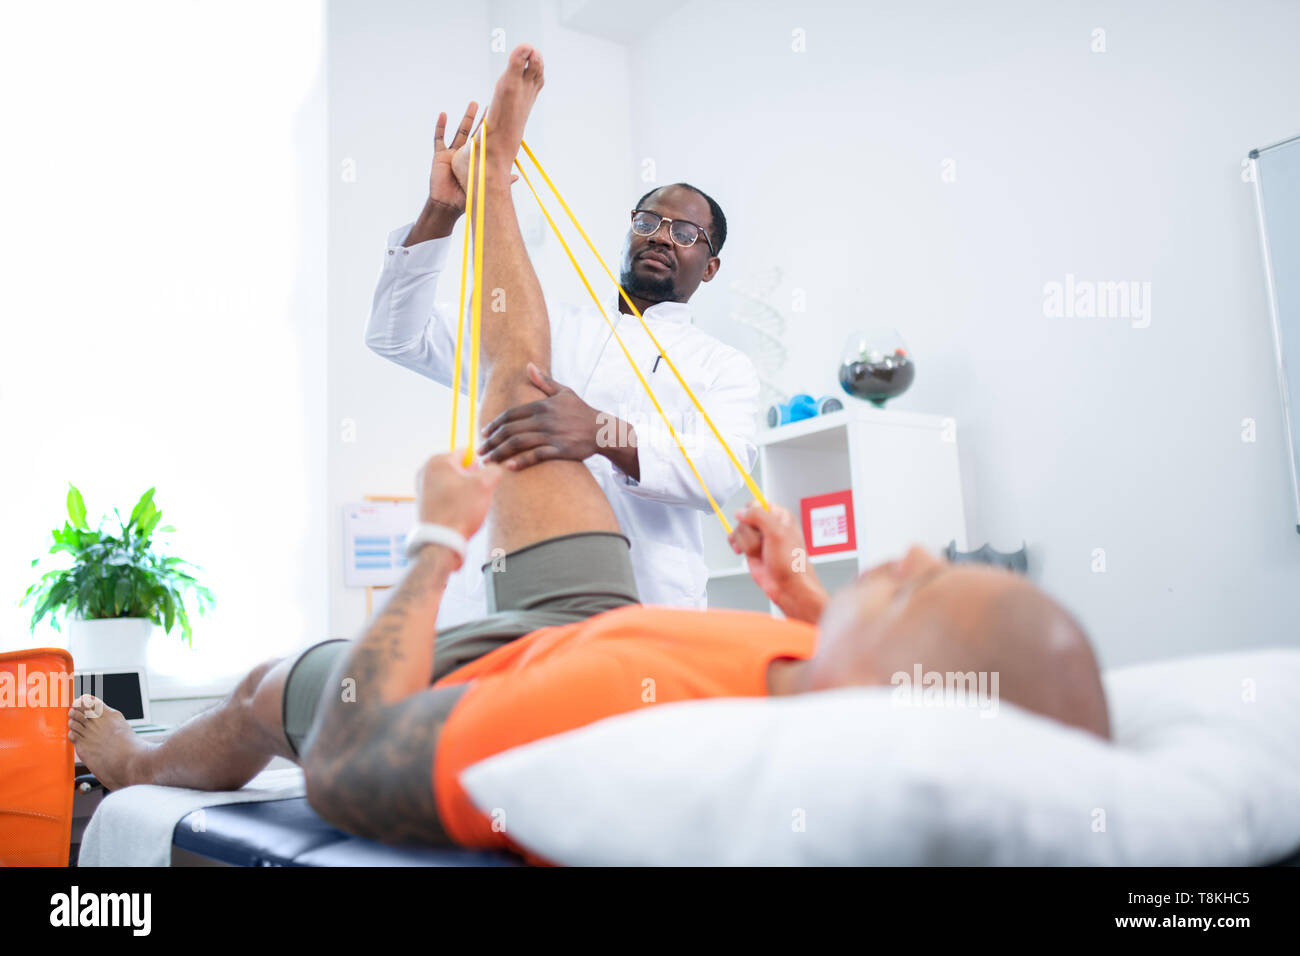 Therapist helping his patient stretching leg after training Stock Photo